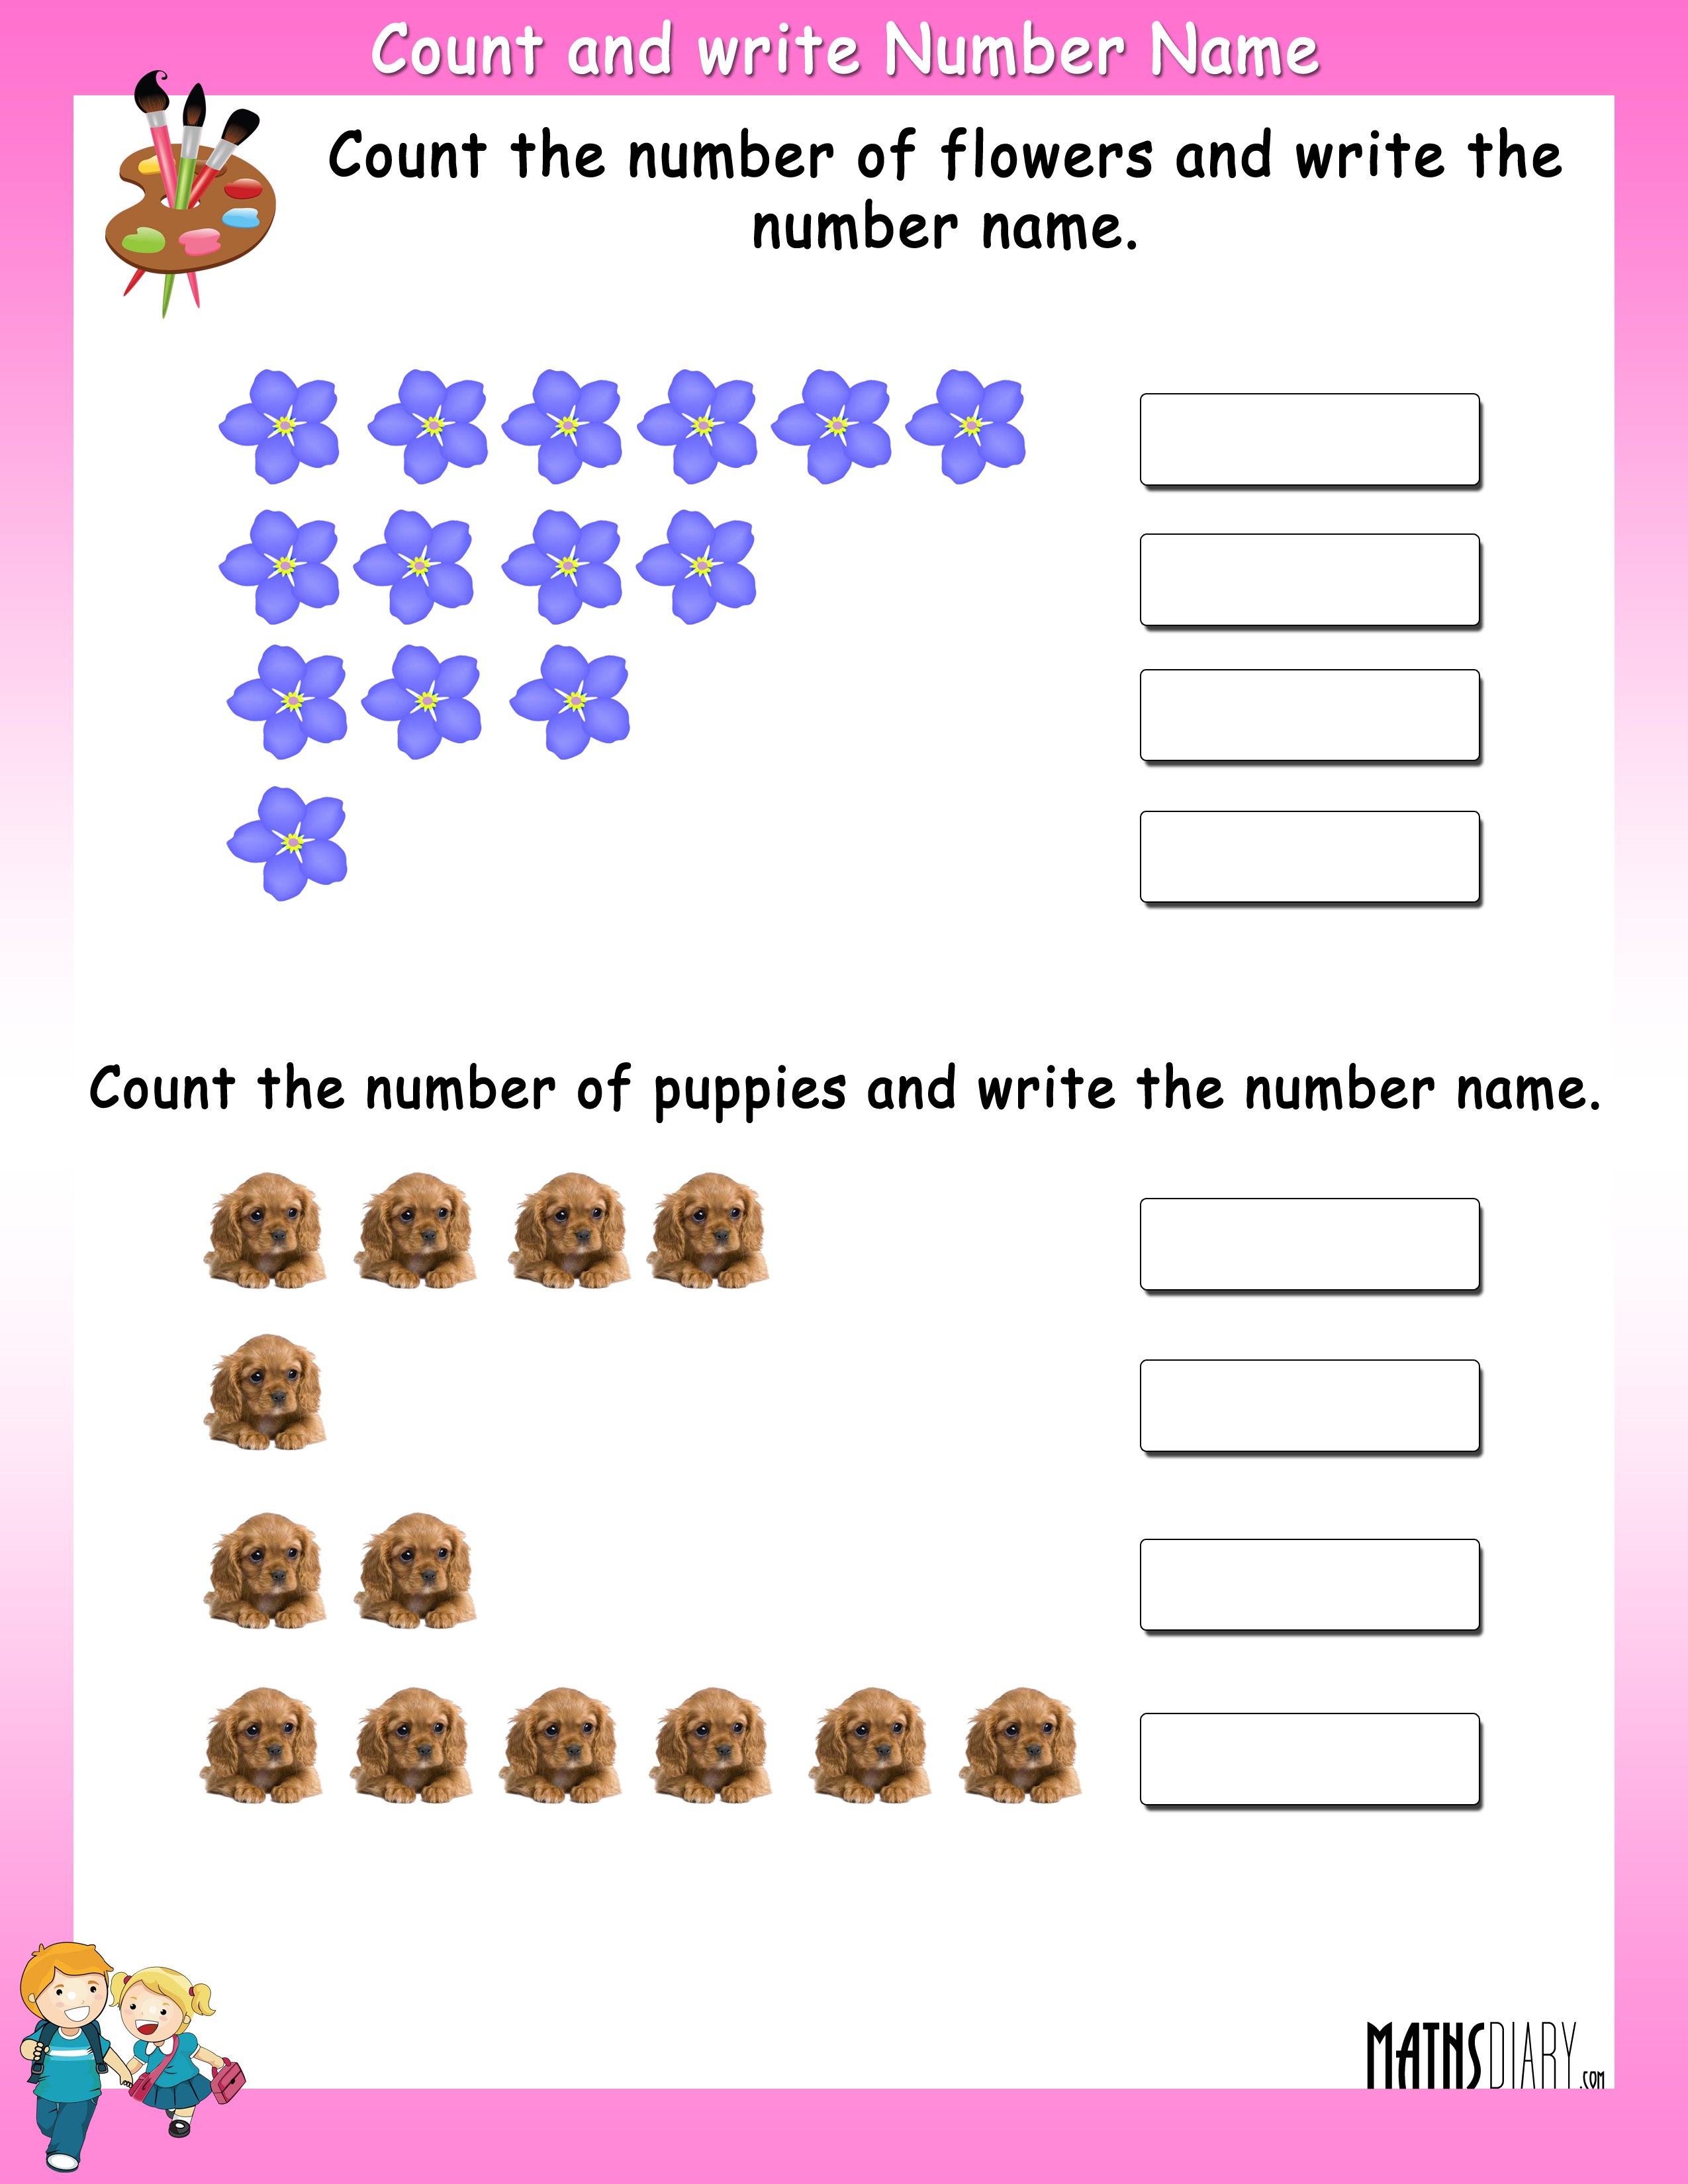 count-and-write-number-names-math-worksheets-mathsdiary